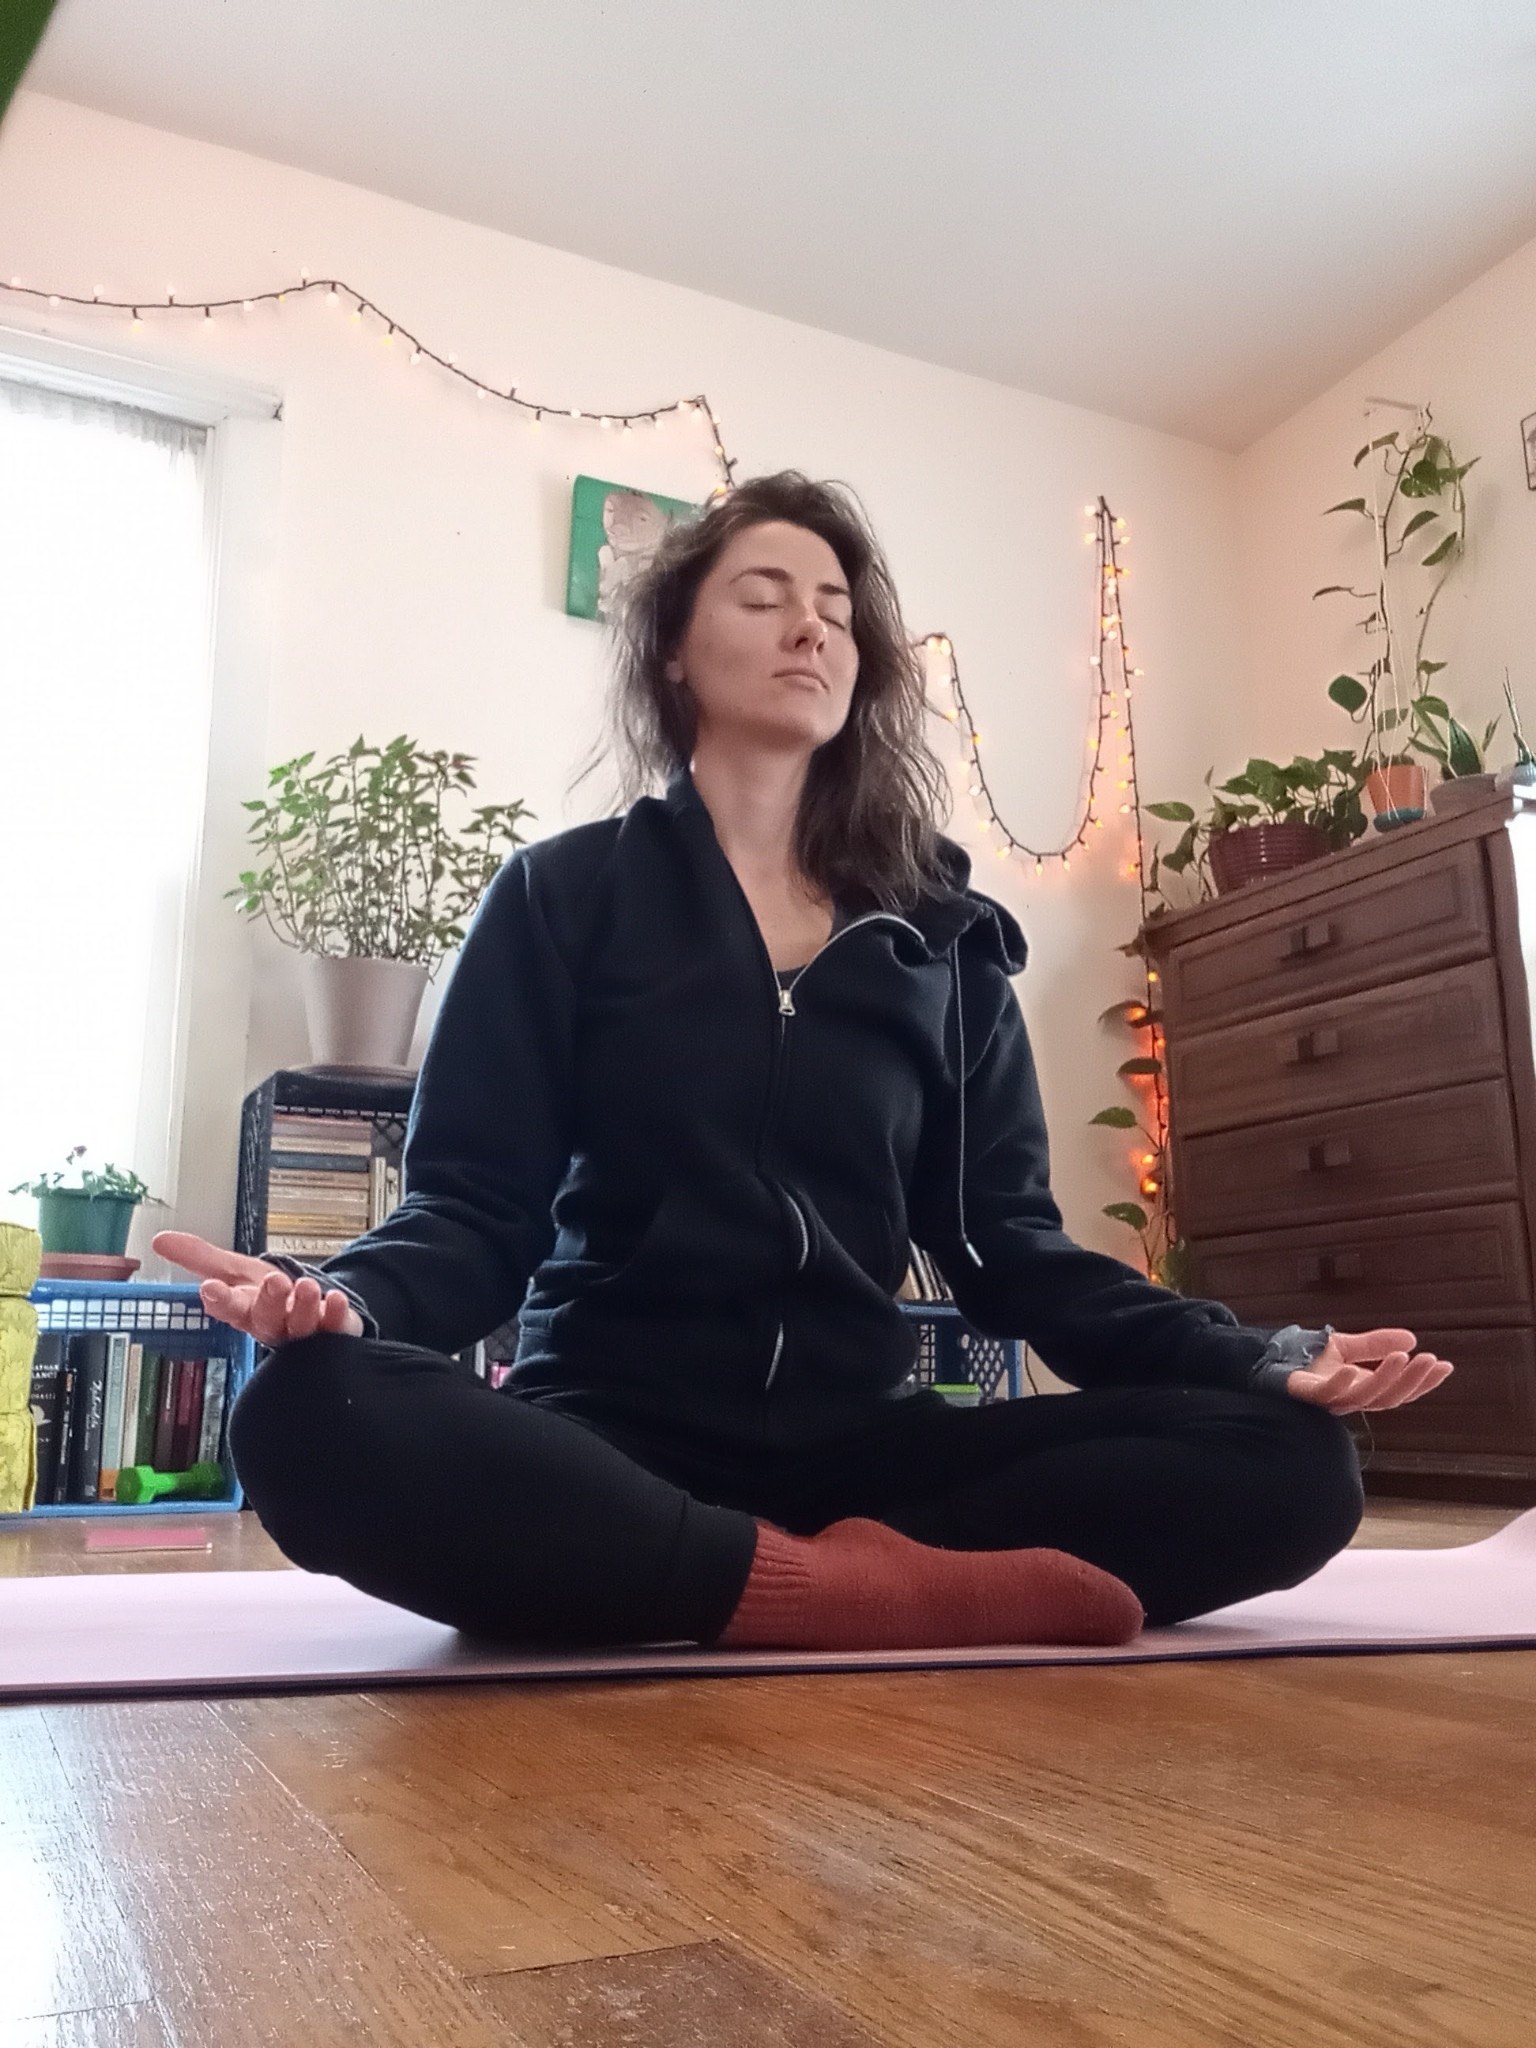 Dressed in a black zip-up hoodie, black pants, and red socks, yoga instructor Amber sits cross-legged on a red yoga mat with her hands palm-up on her knees and her eyes closed. Plants, books, and a string of white lights can be seen behind her.